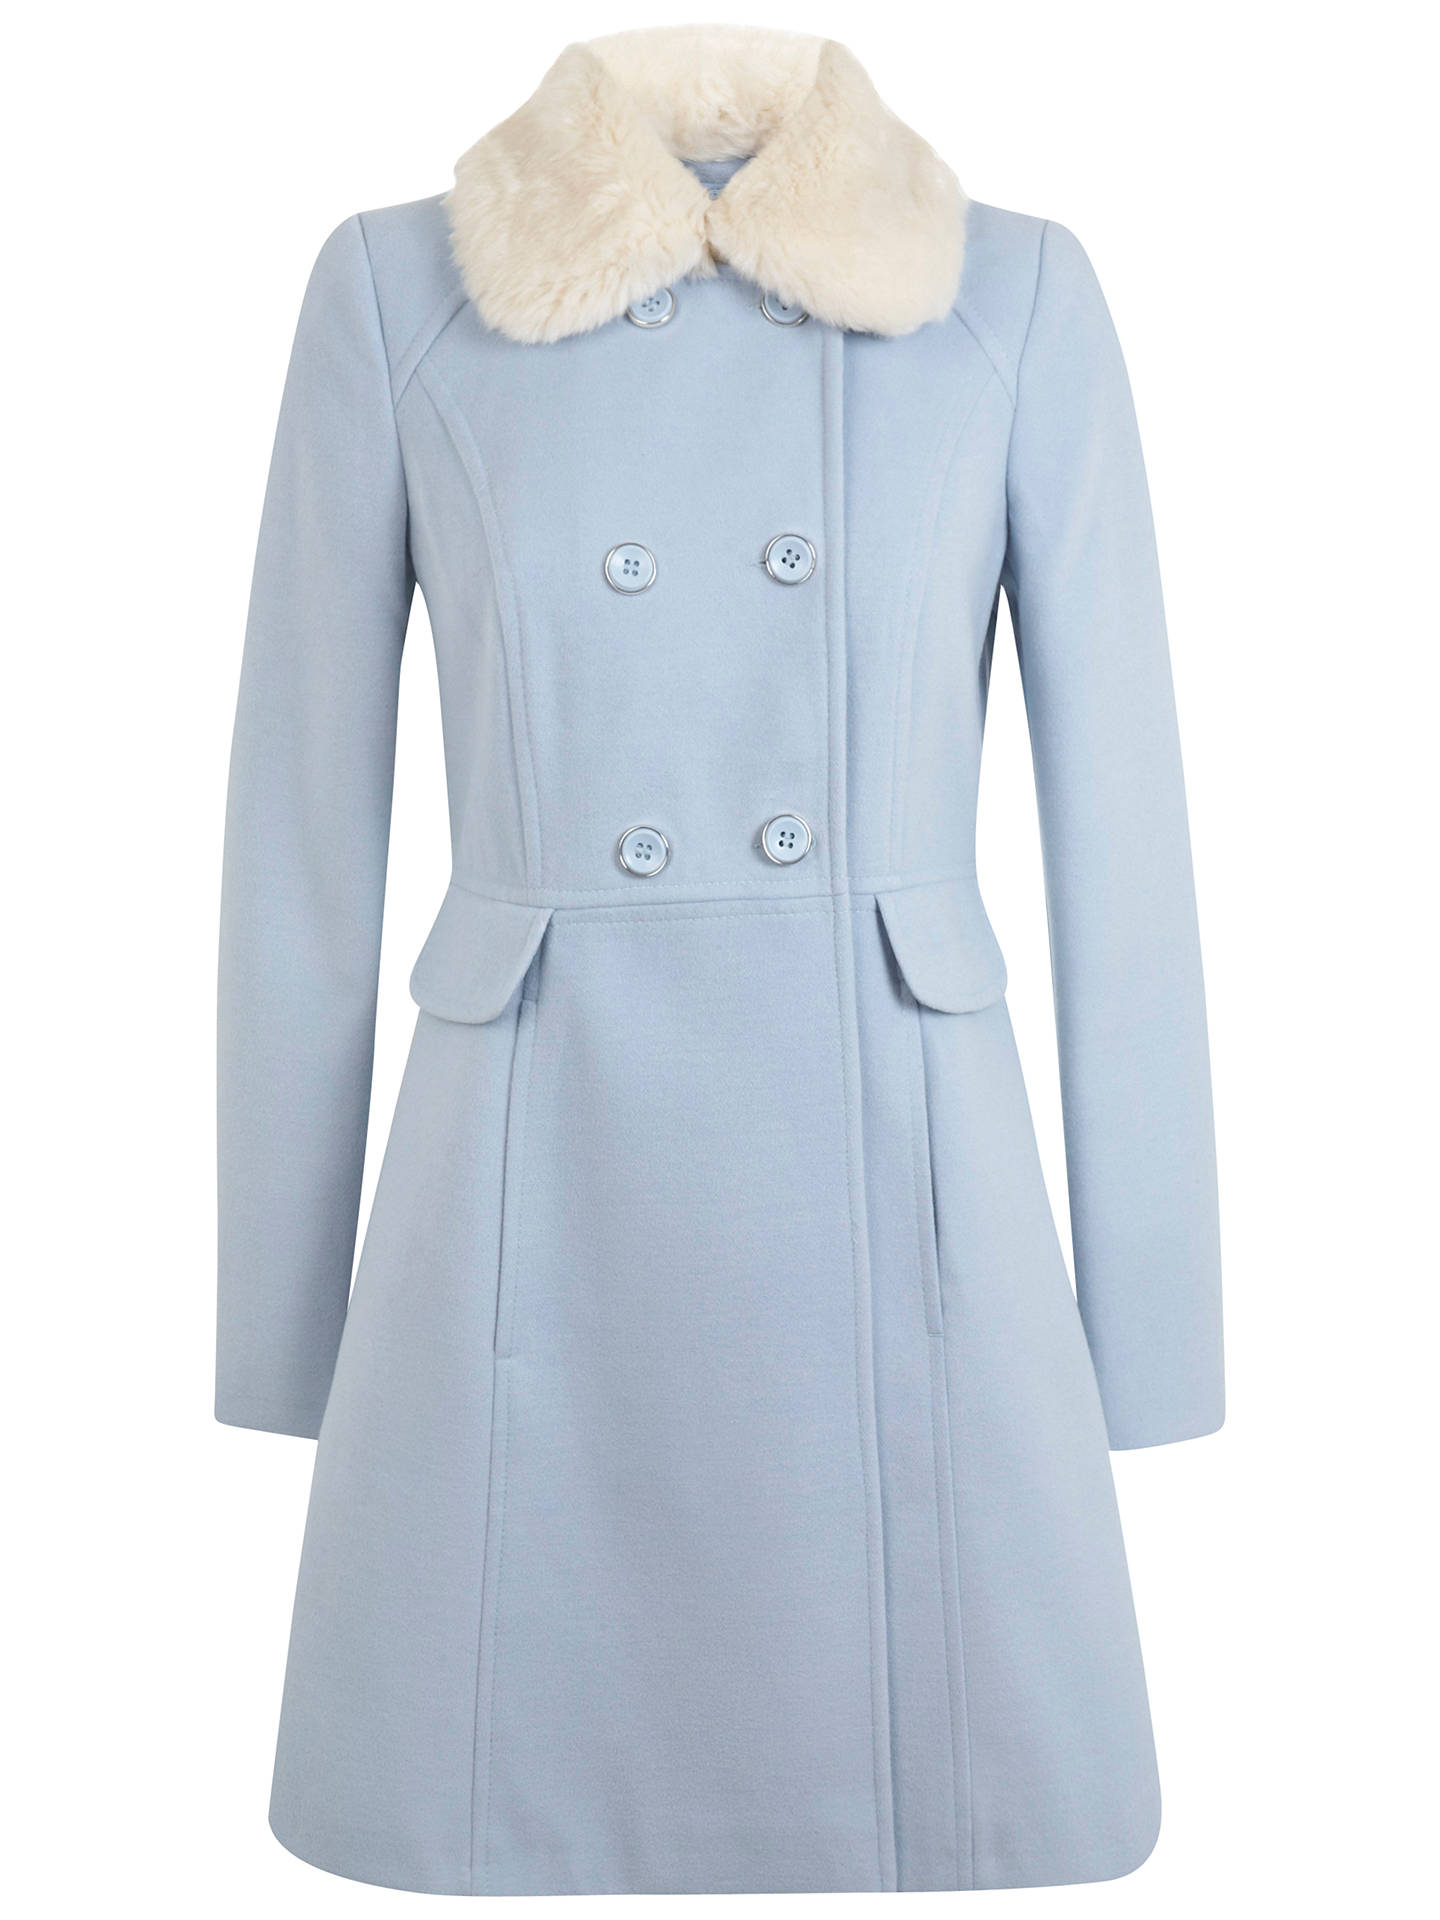 Miss Selfridge Double Breasted Skirted Coat, Pale Blue at John Lewis ...